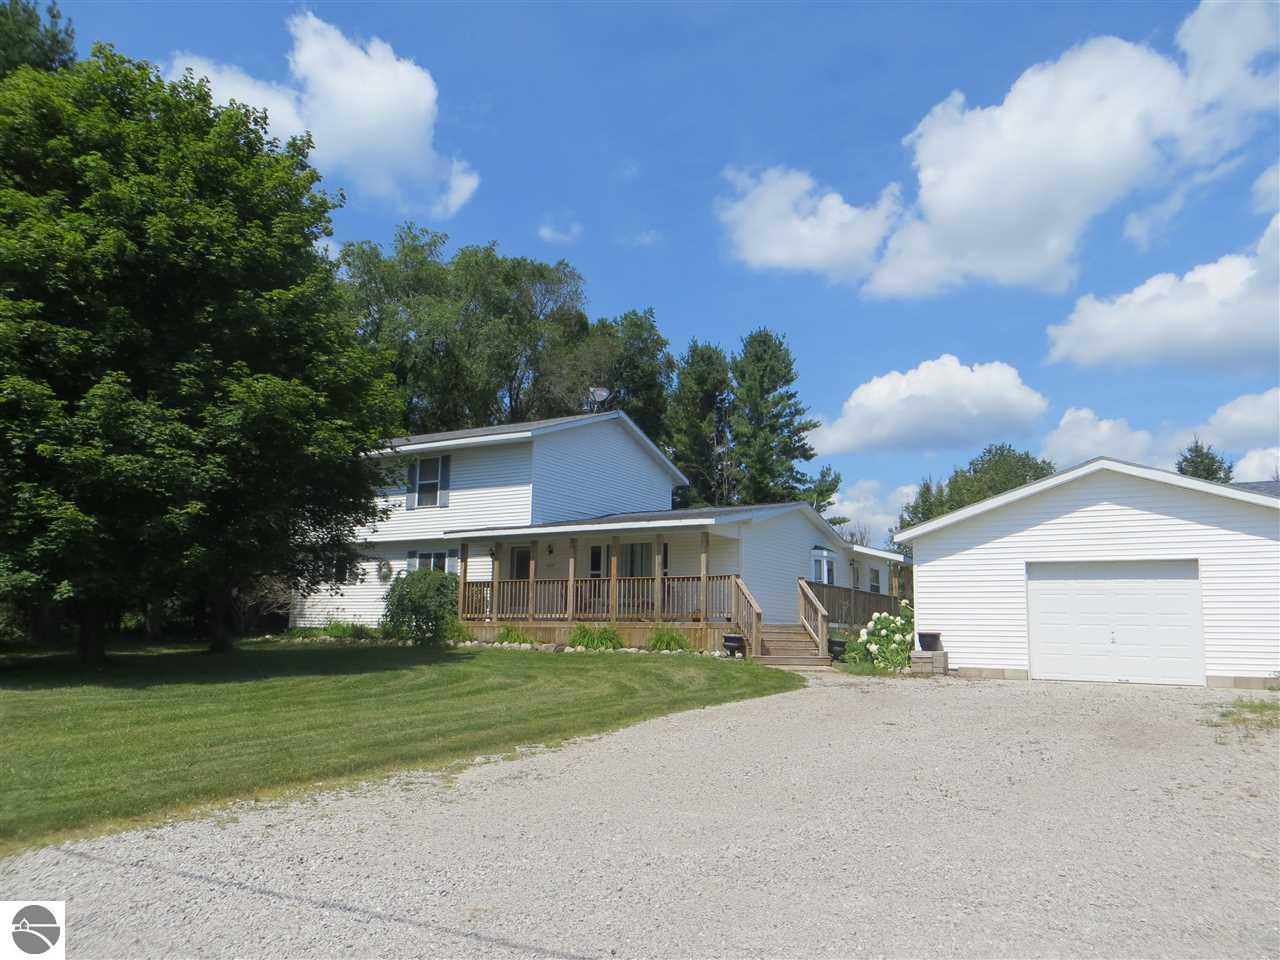 450 Old State Road, East Tawas, MI 48730 photo 2 of 68